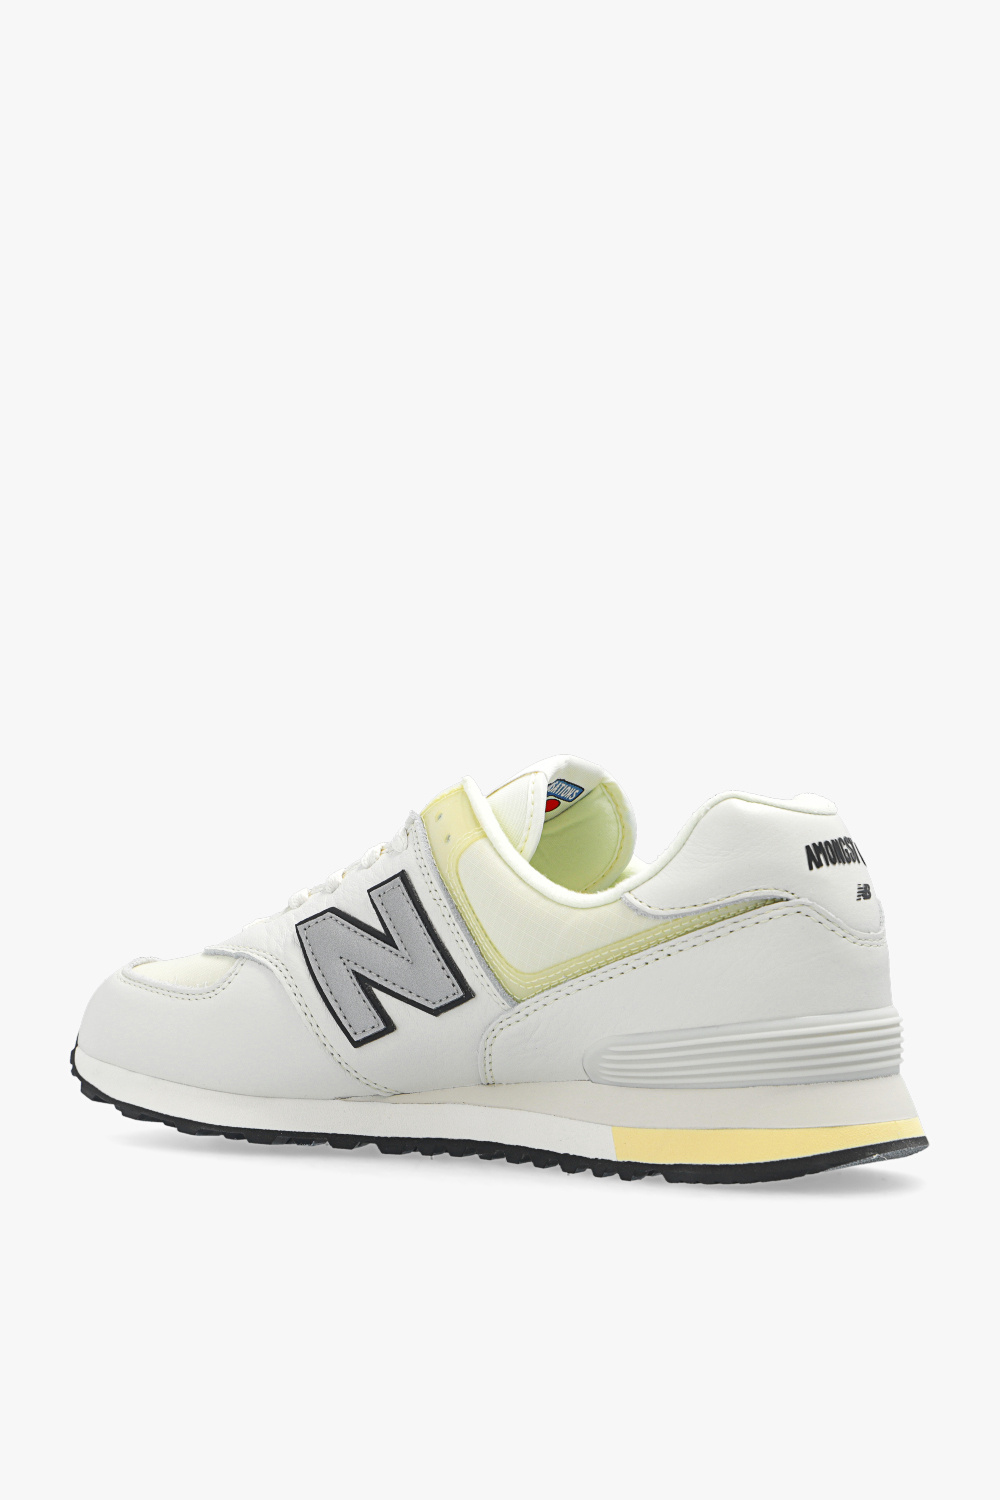 New Balance images of new balance 990 grey green have been released